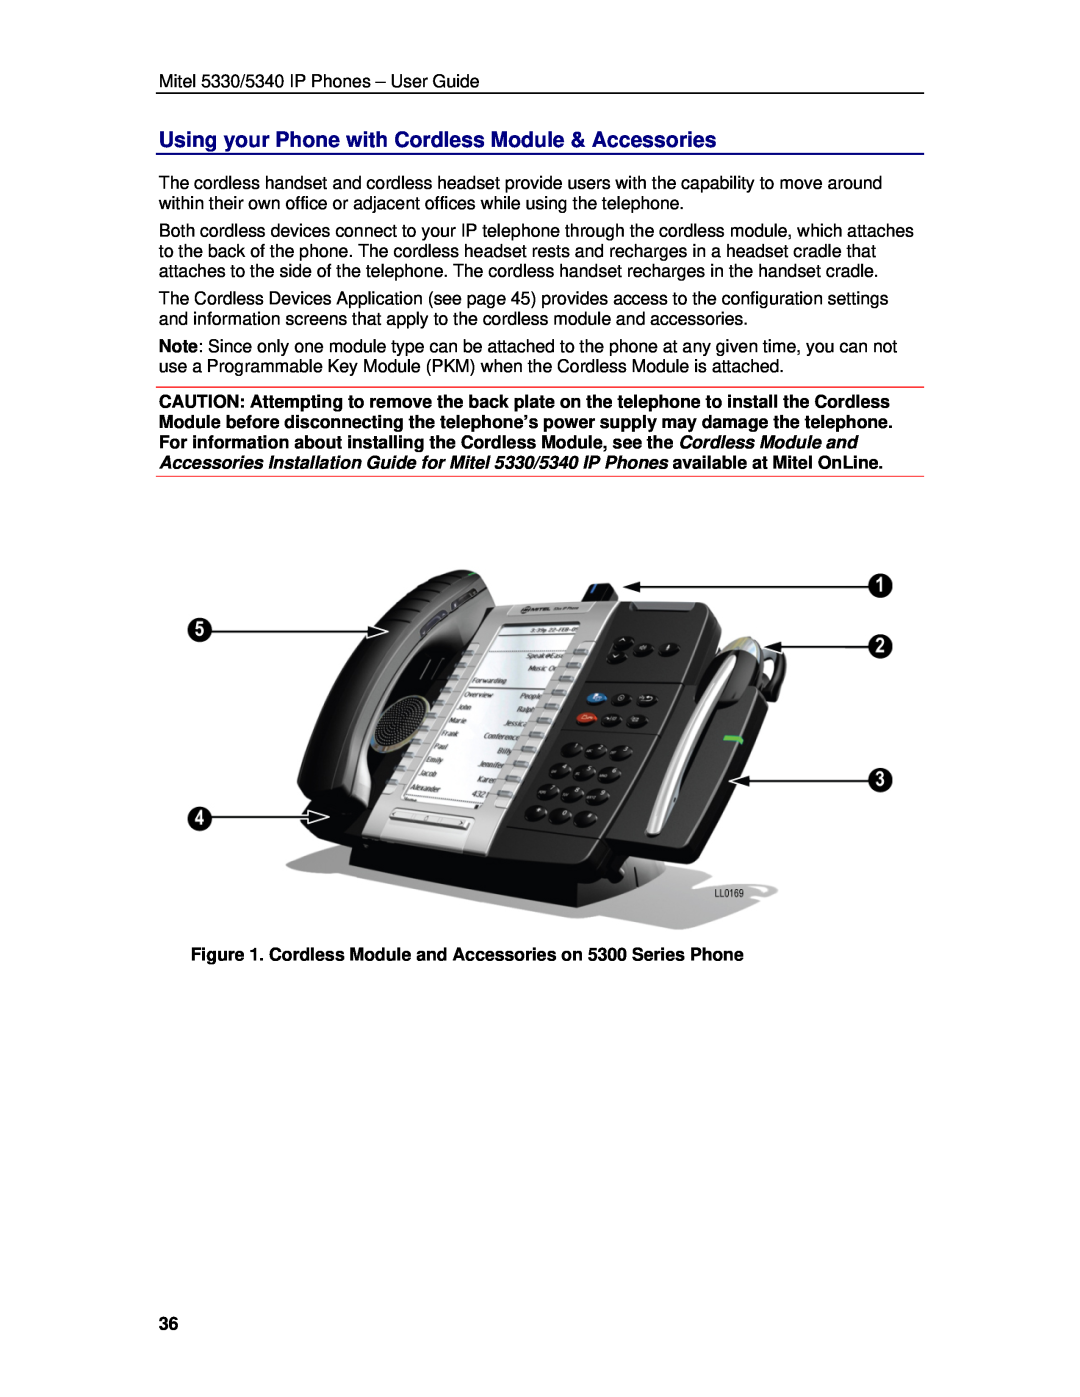 Mitel 5330 manual Using your Phone with Cordless Module & Accessories, Cordless Module and Accessories on 5300 Series Phone 